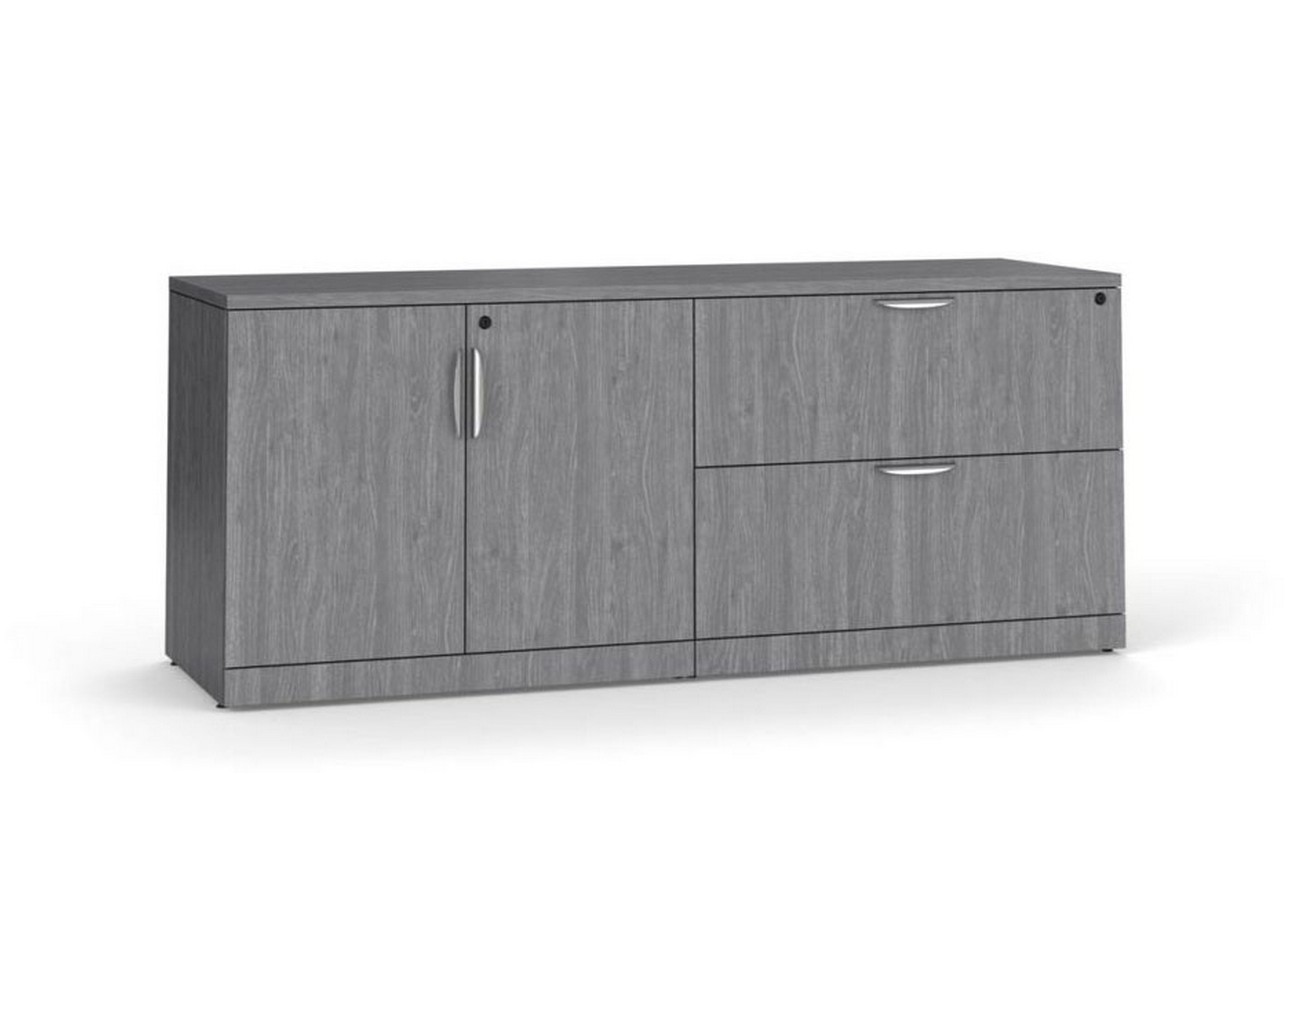 Lateral Storage Credenza – Newport Grey Base and Top